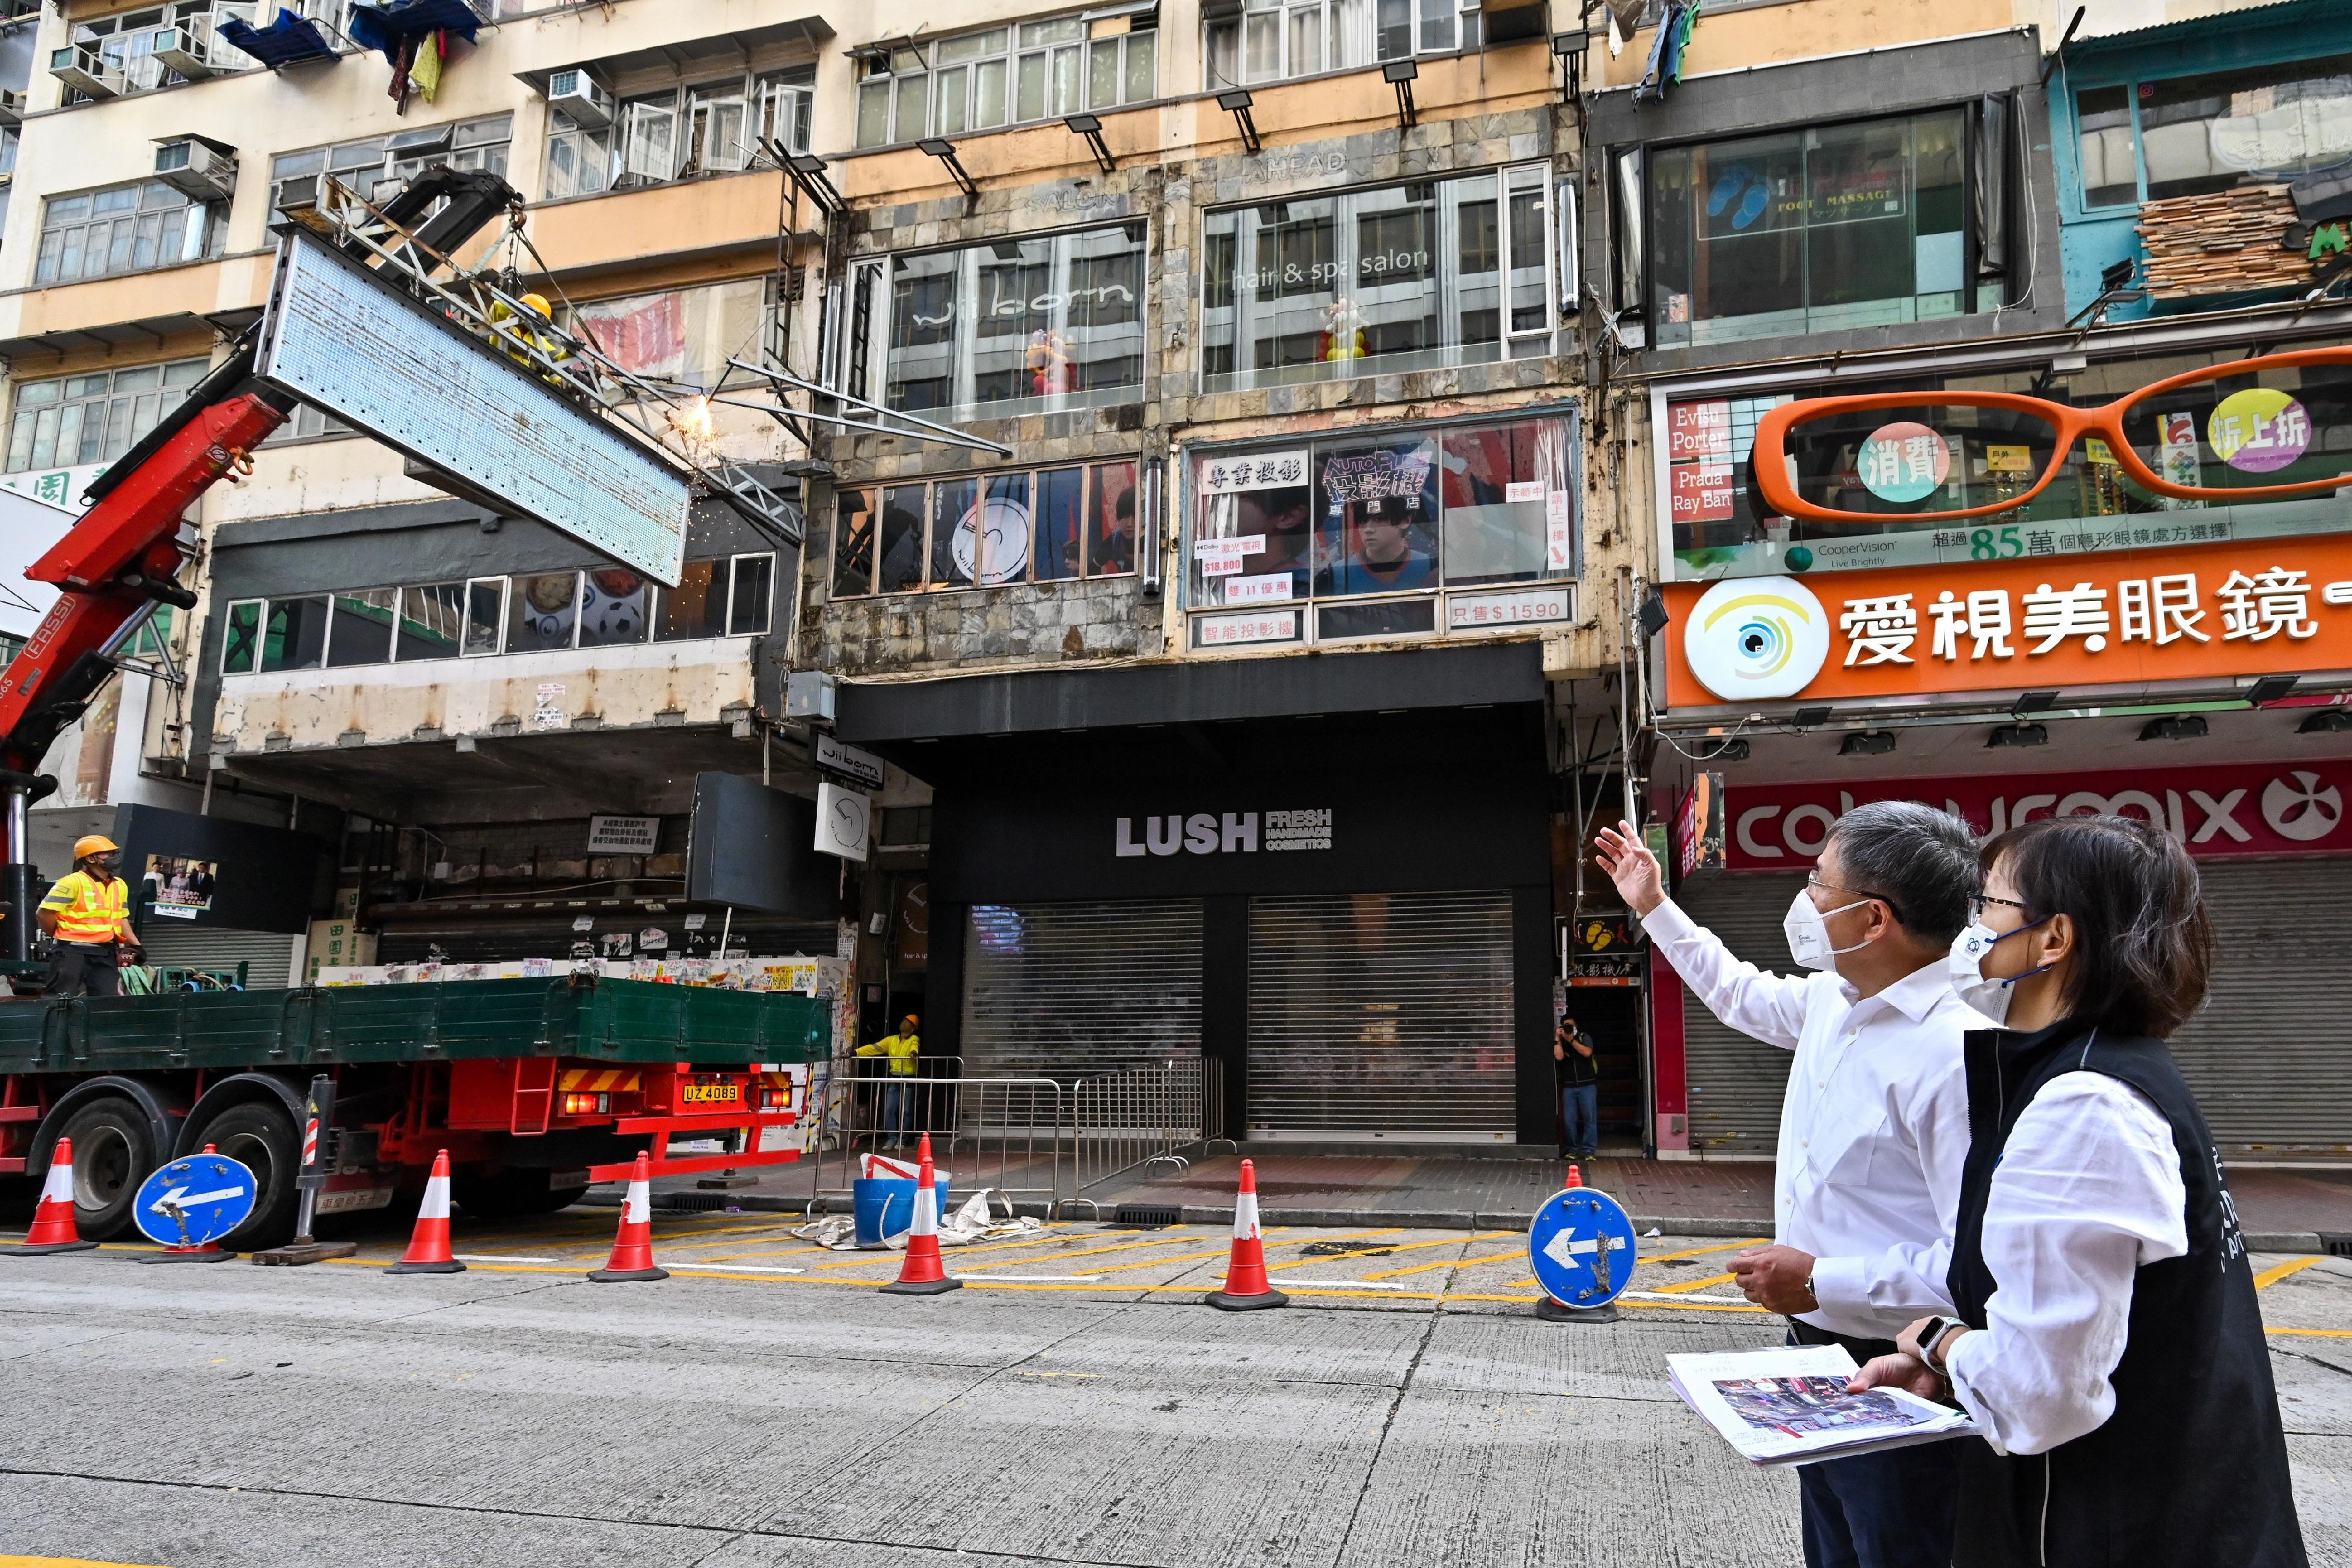 The Deputy Chief Secretary for Administration, Mr Cheuk Wing-hing (left), views signboard removal works at Sai Yeung Choi Street South in Mong Kok this morning (November 15). Next to Mr Cheuk is the Director of Buildings, Ms Clarice Yu (right).